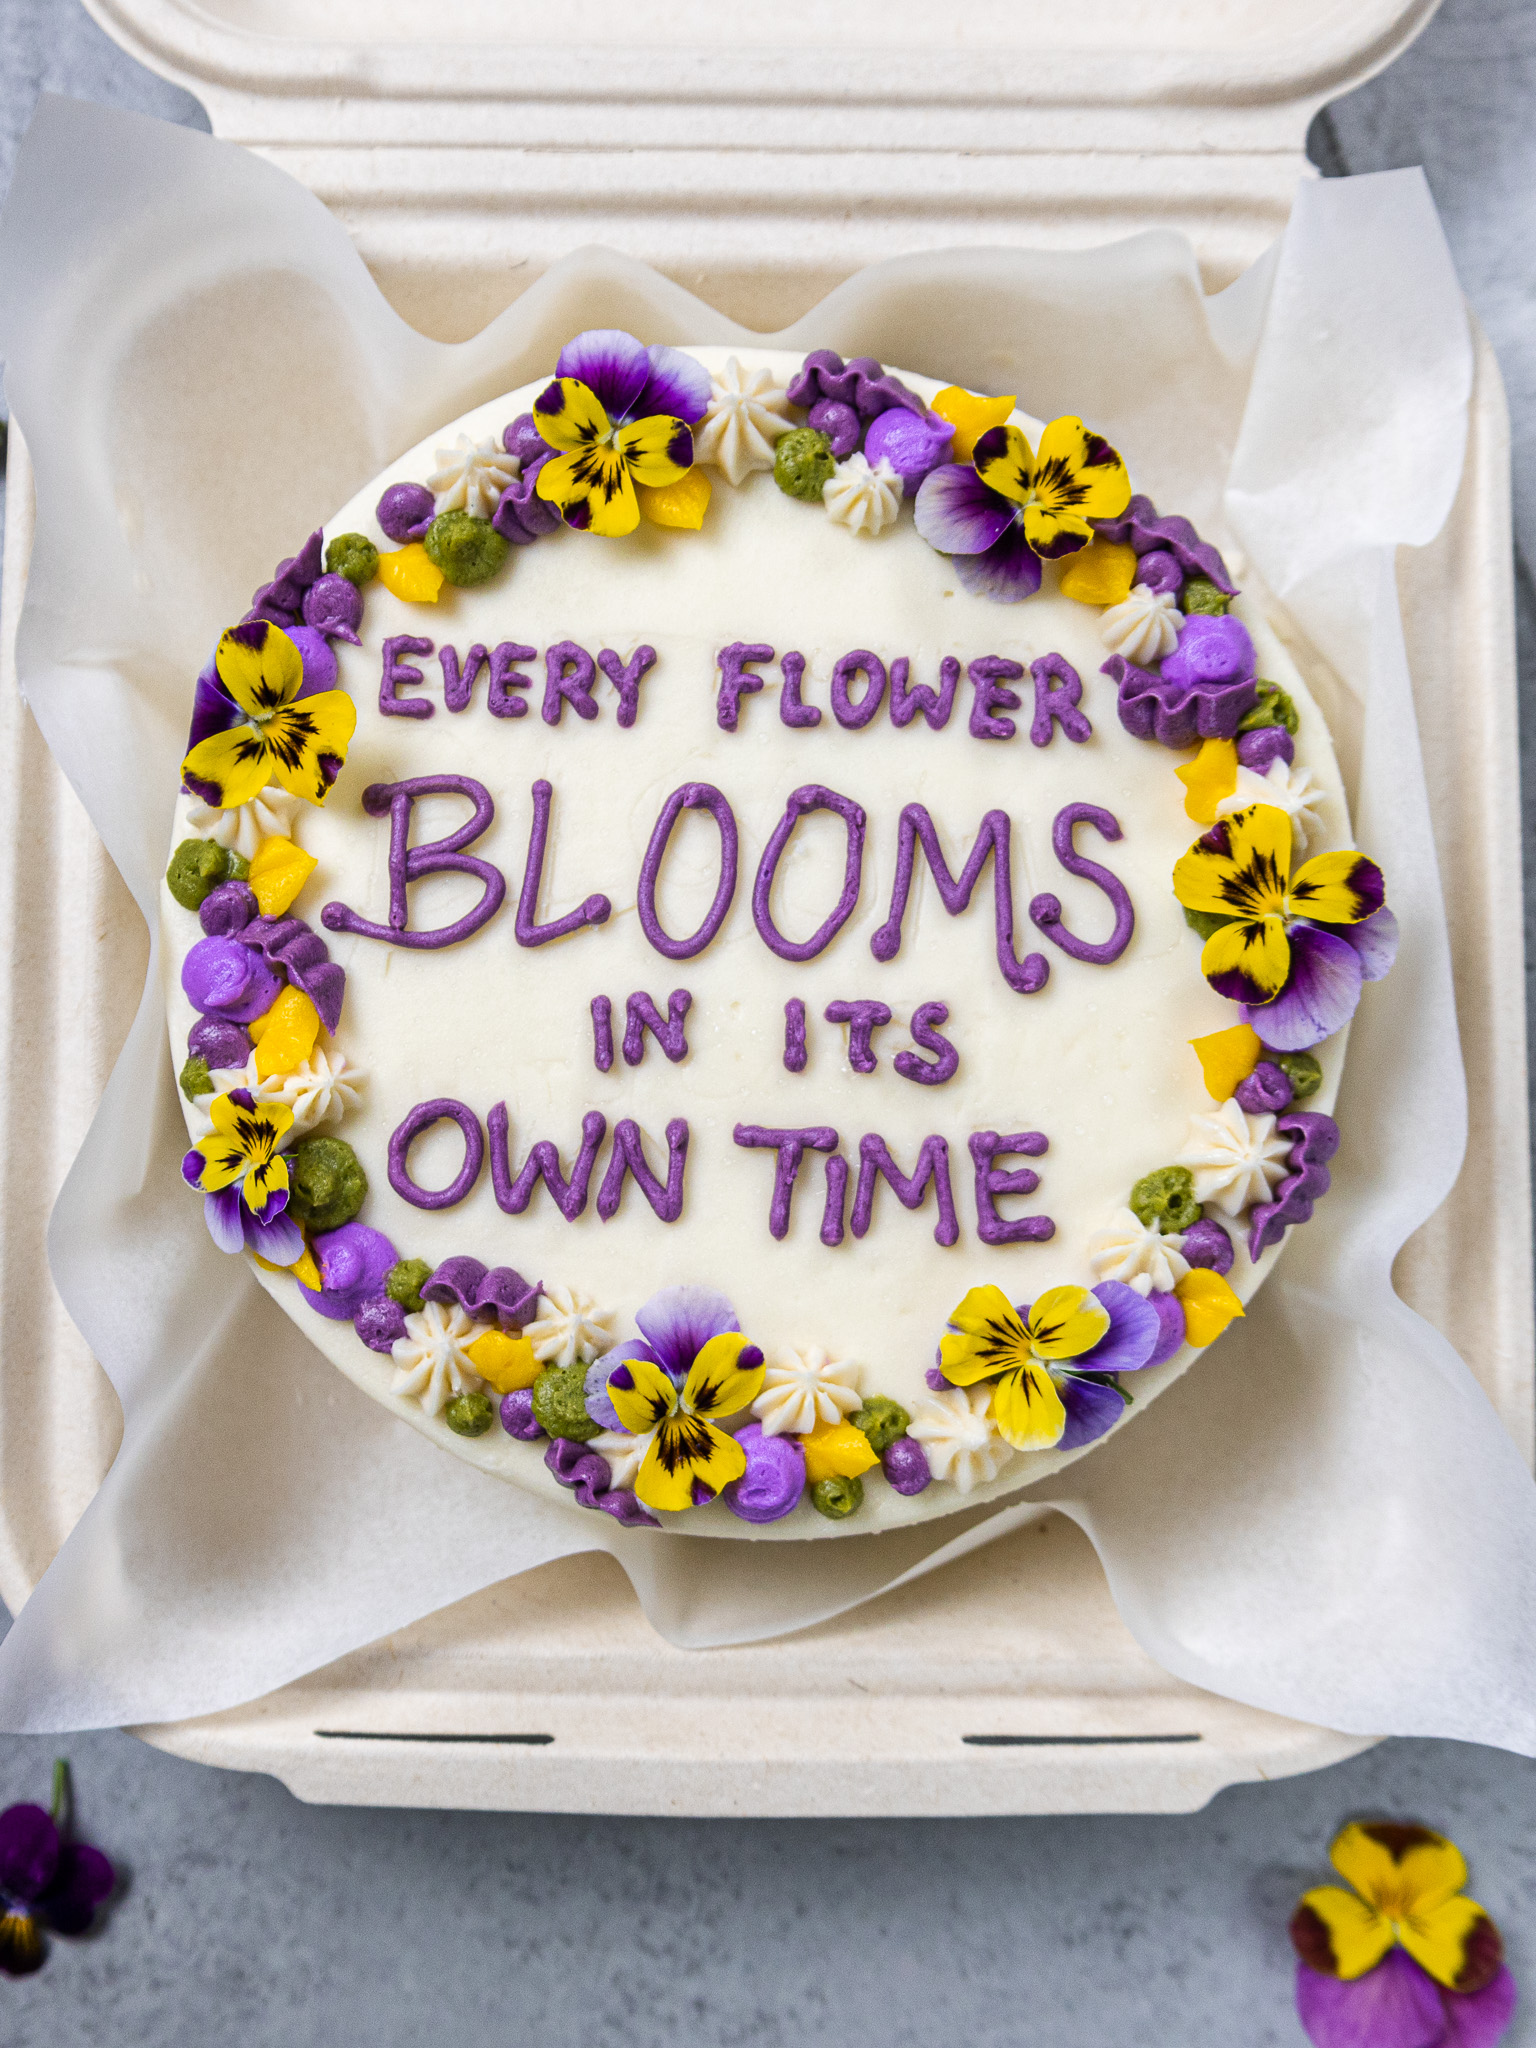 image of an adorable bento cake or lunch box cake decorated with a cute saying and edible flowers